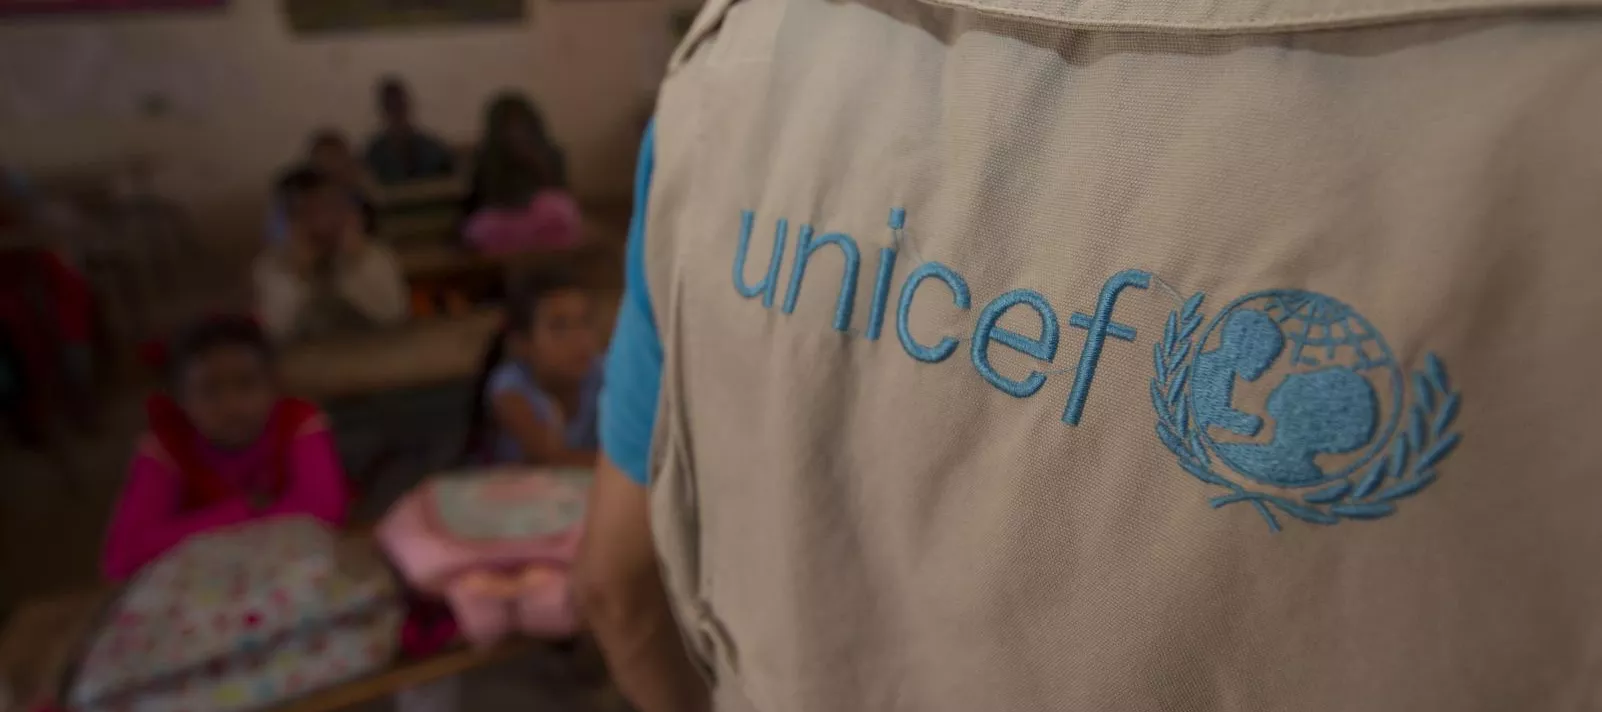 The back of a person wearing a UNICEF branded top